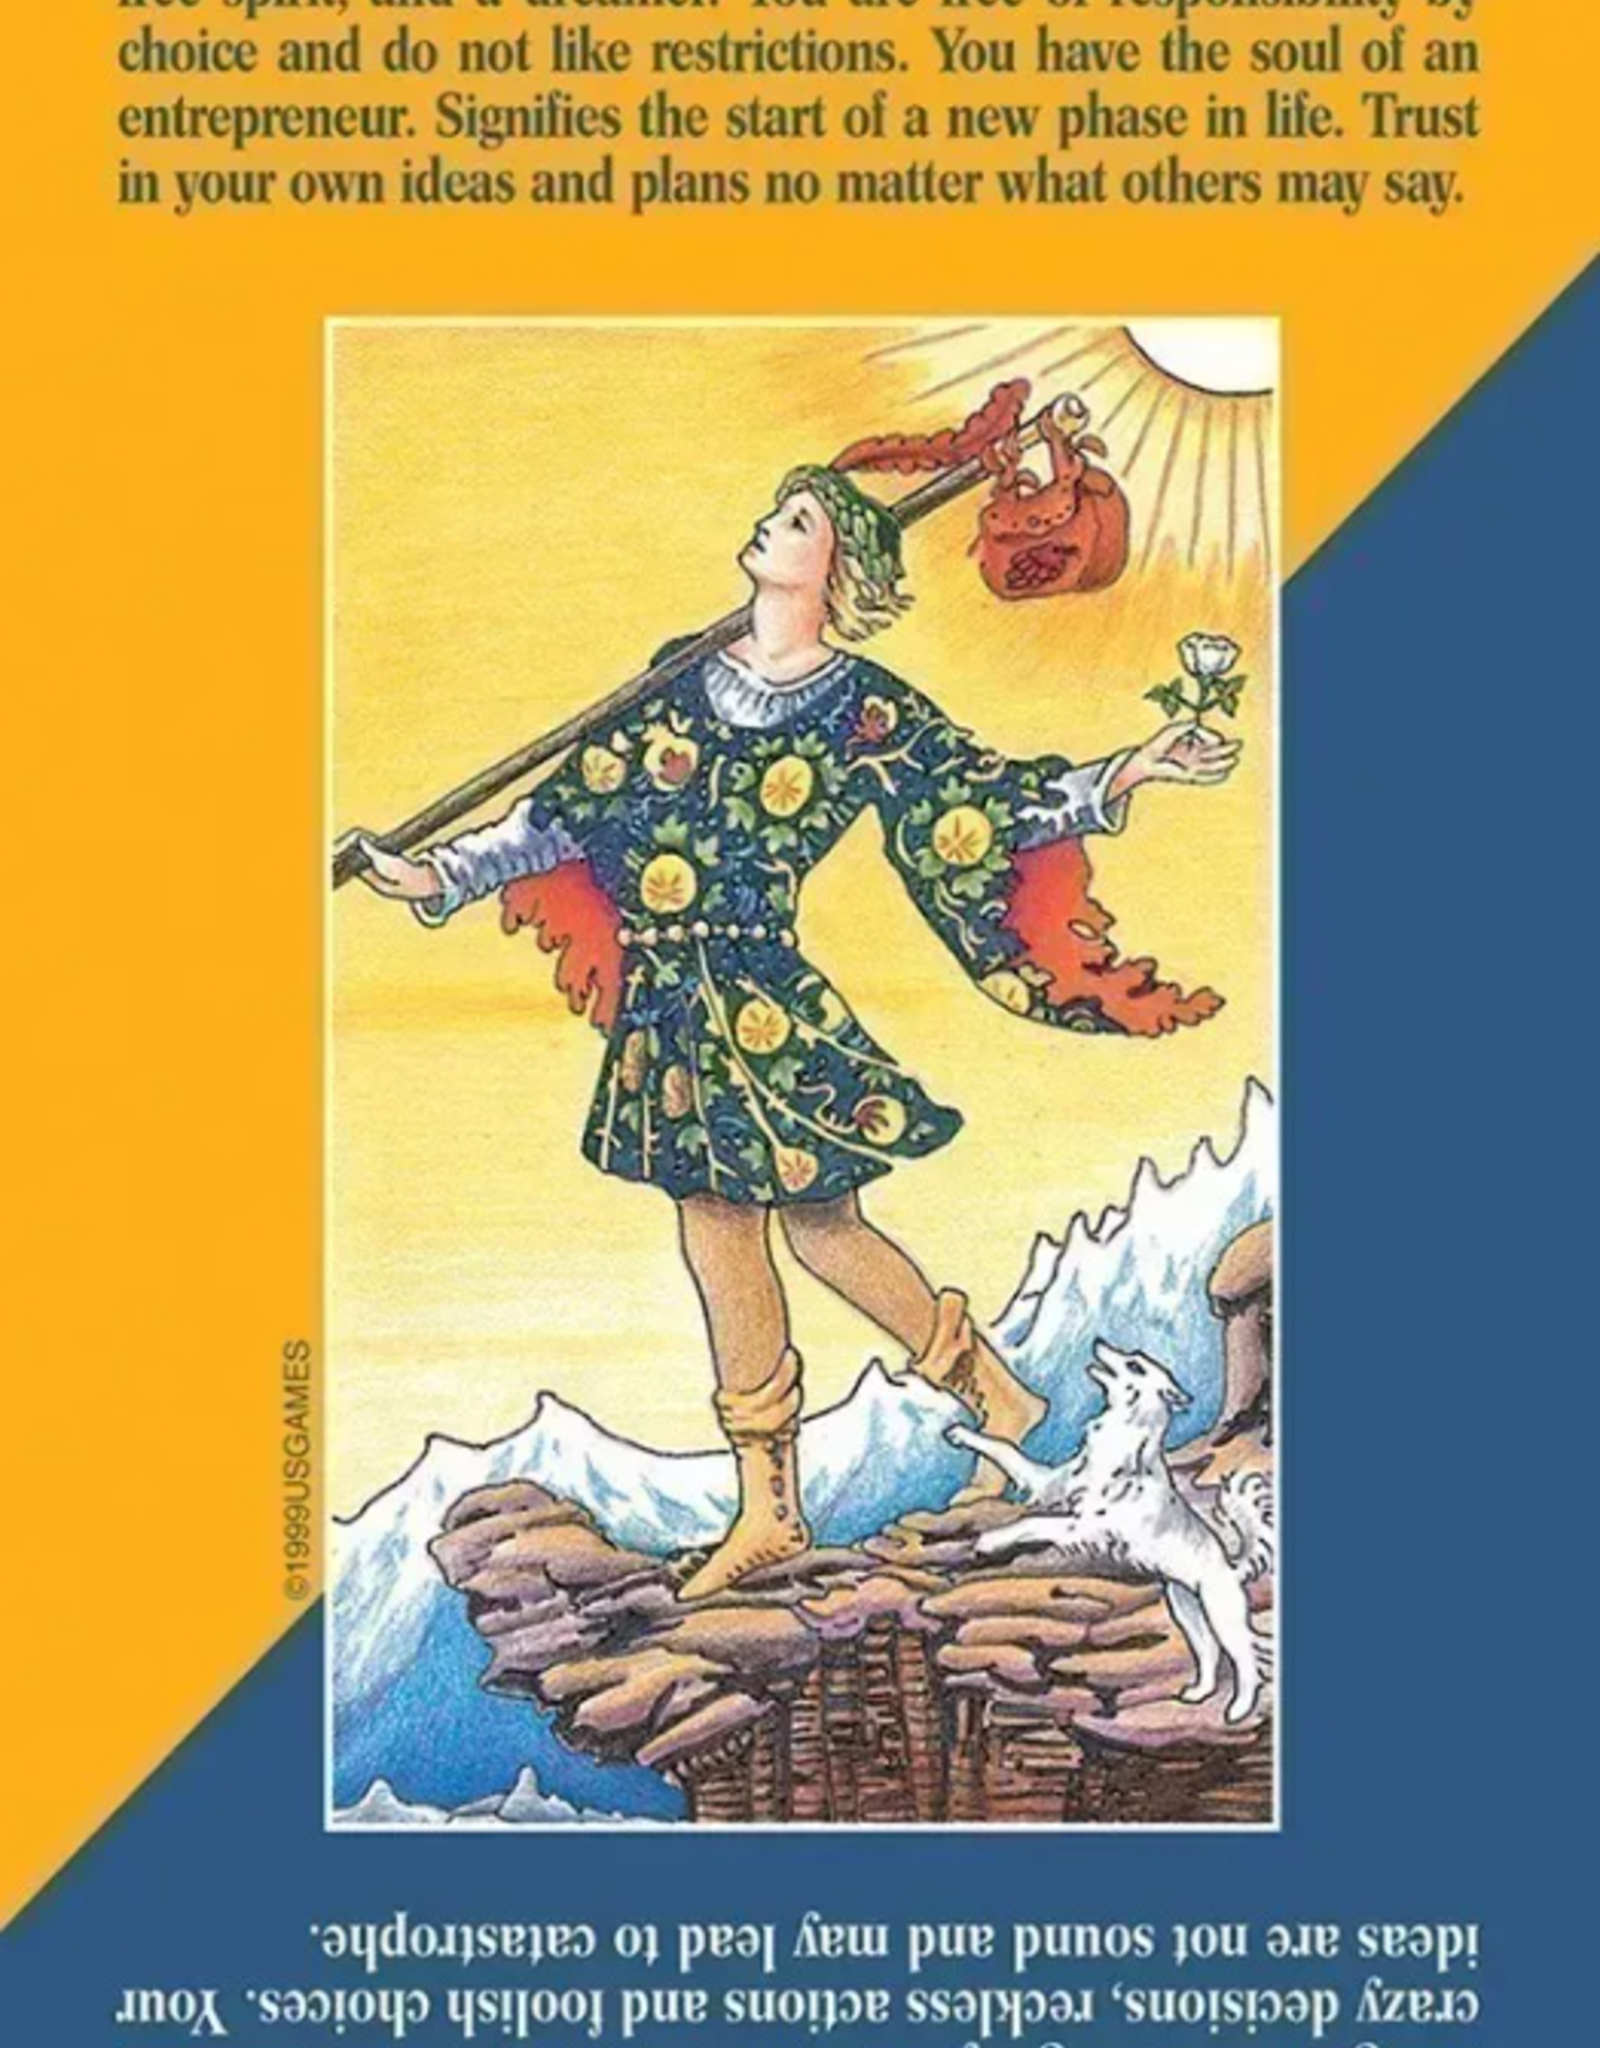 U.S. Games Systems, Inc. Quick & Easy Tarot